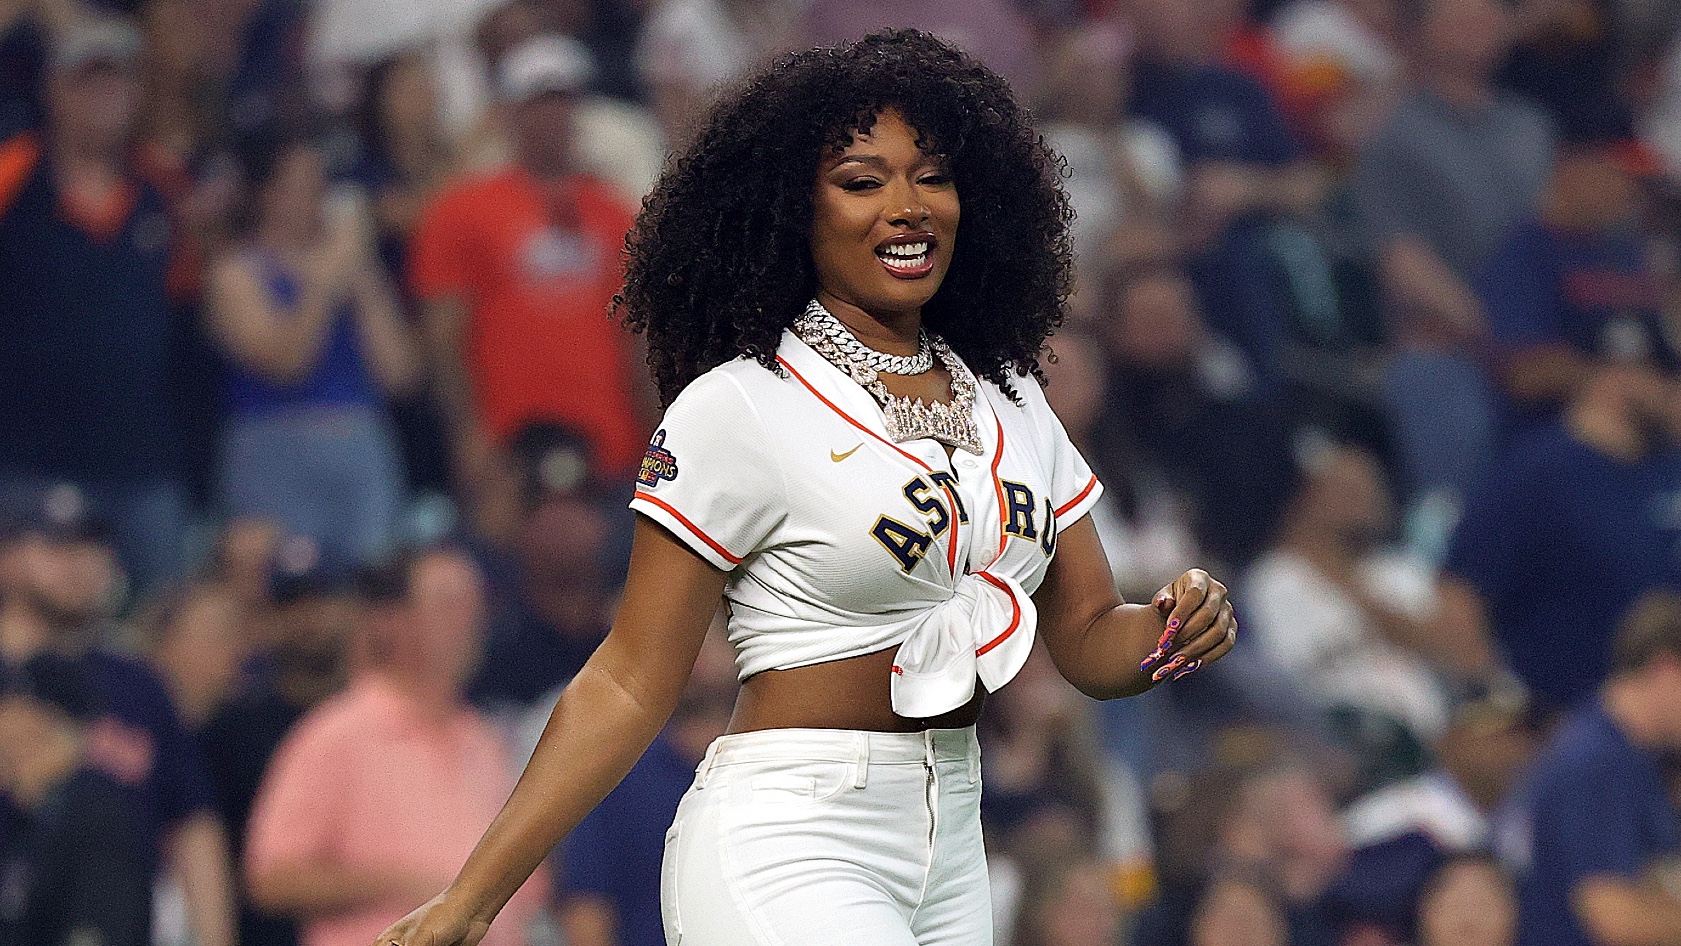 WATCH: Megan Thee Stallion’s Opening Day Pitch No Strike, But Better Than Fauci’s